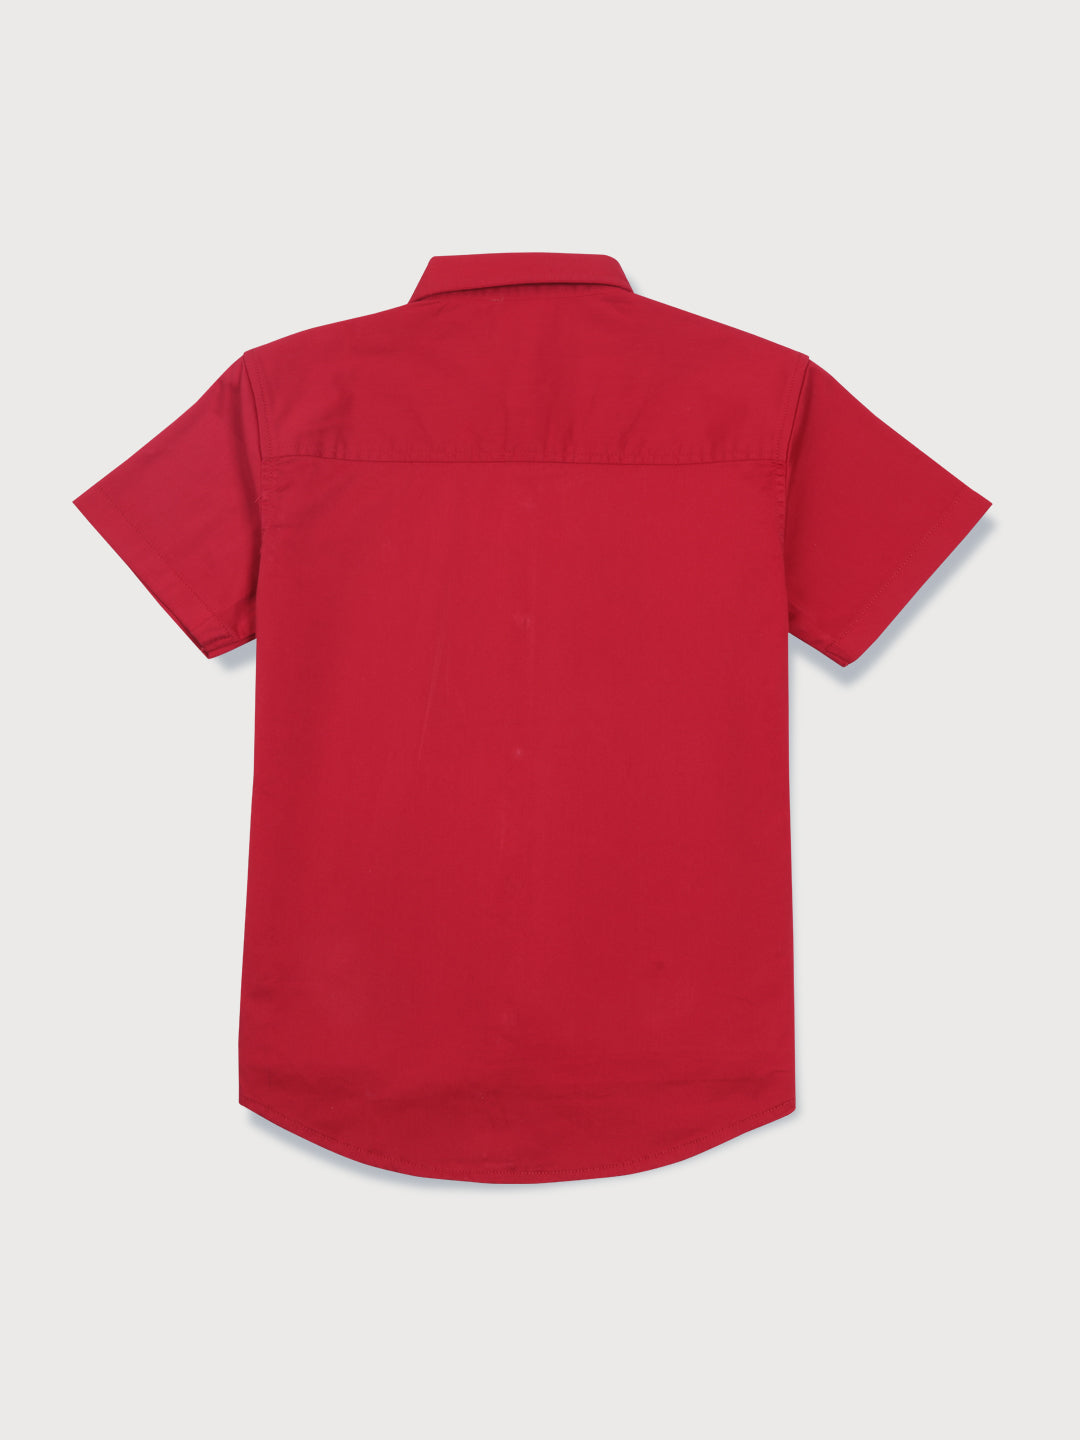 Boys Red Cotton Solid Half Sleeves Shirt